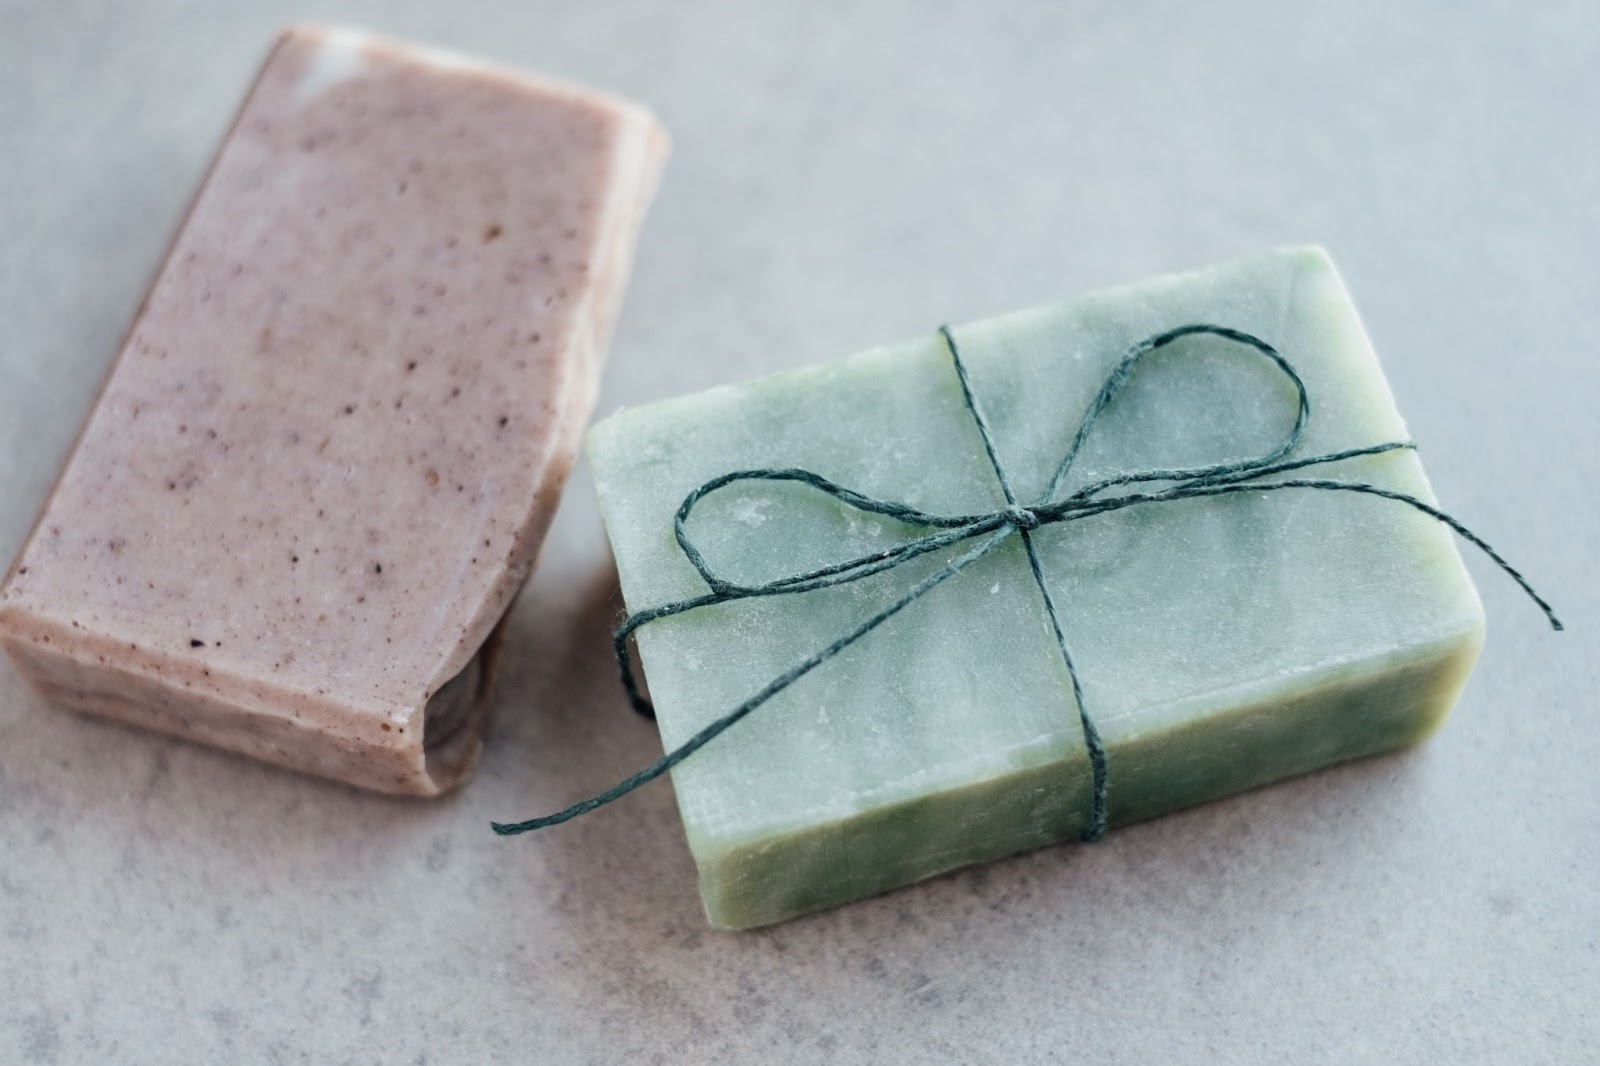 What Is A Natural, Non-Toxic Soap